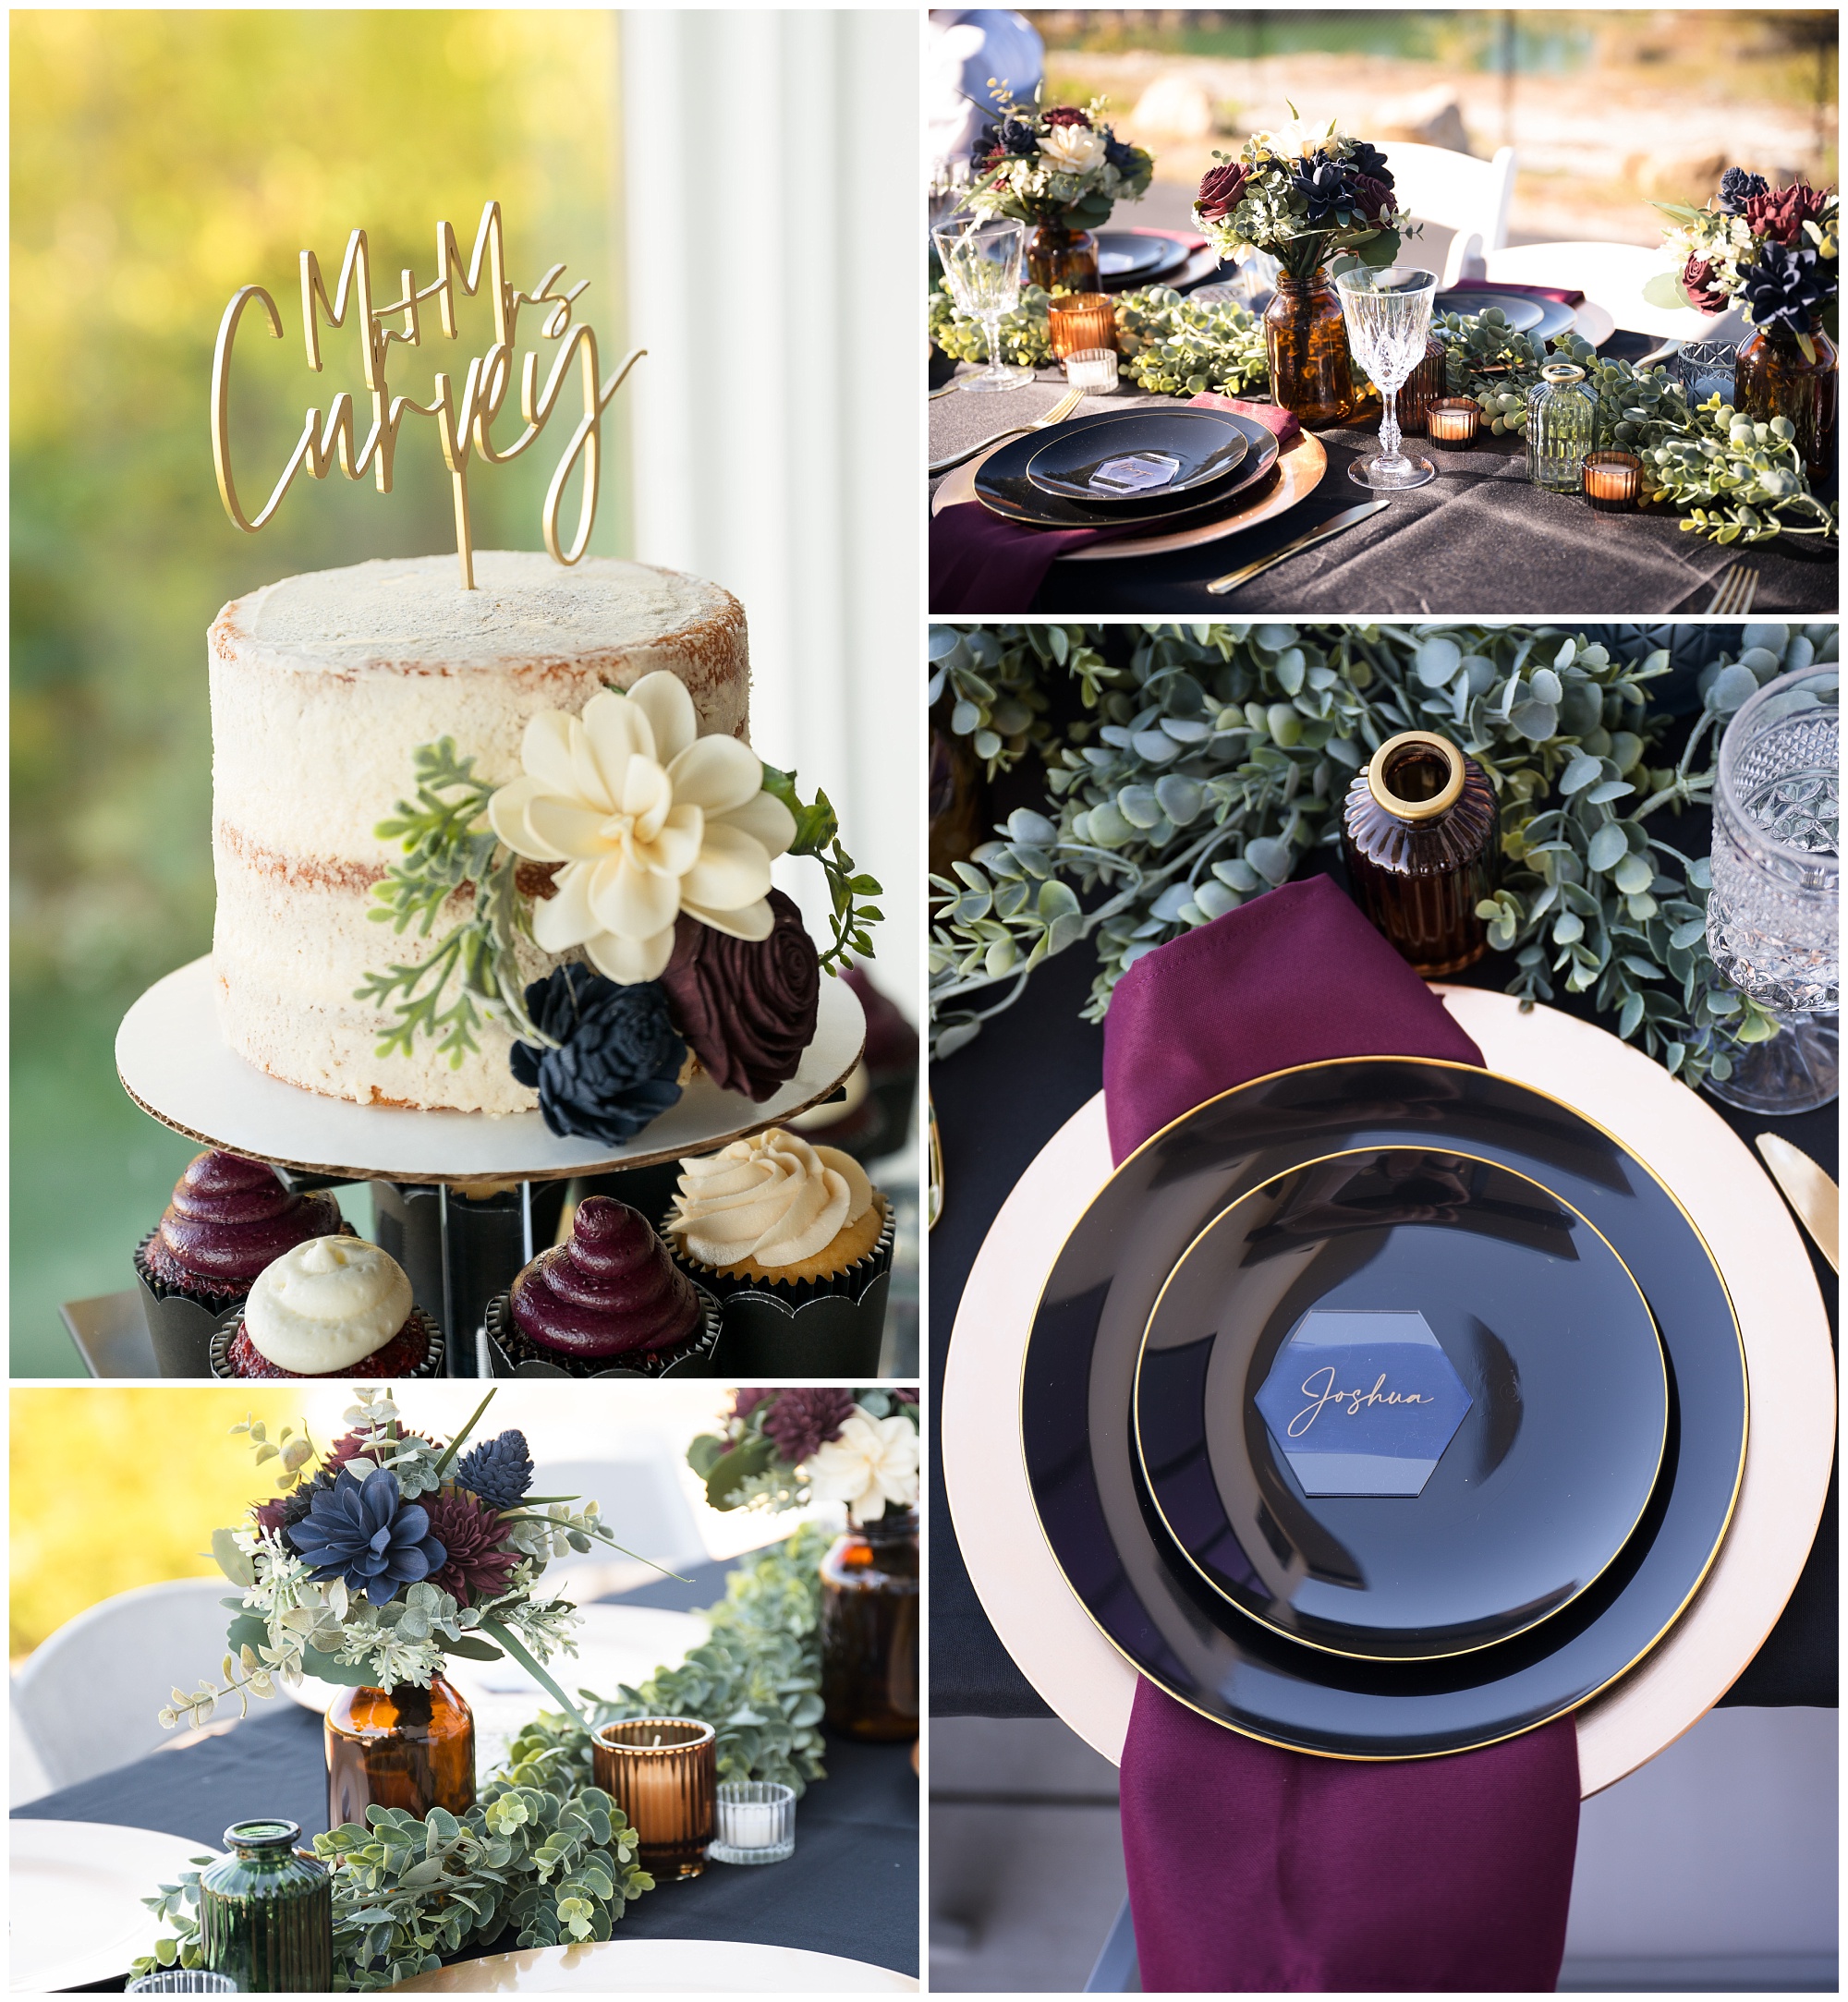 Hunter green, burgundy, and navy wedding decor featuring sola wood flowers and a naked cake